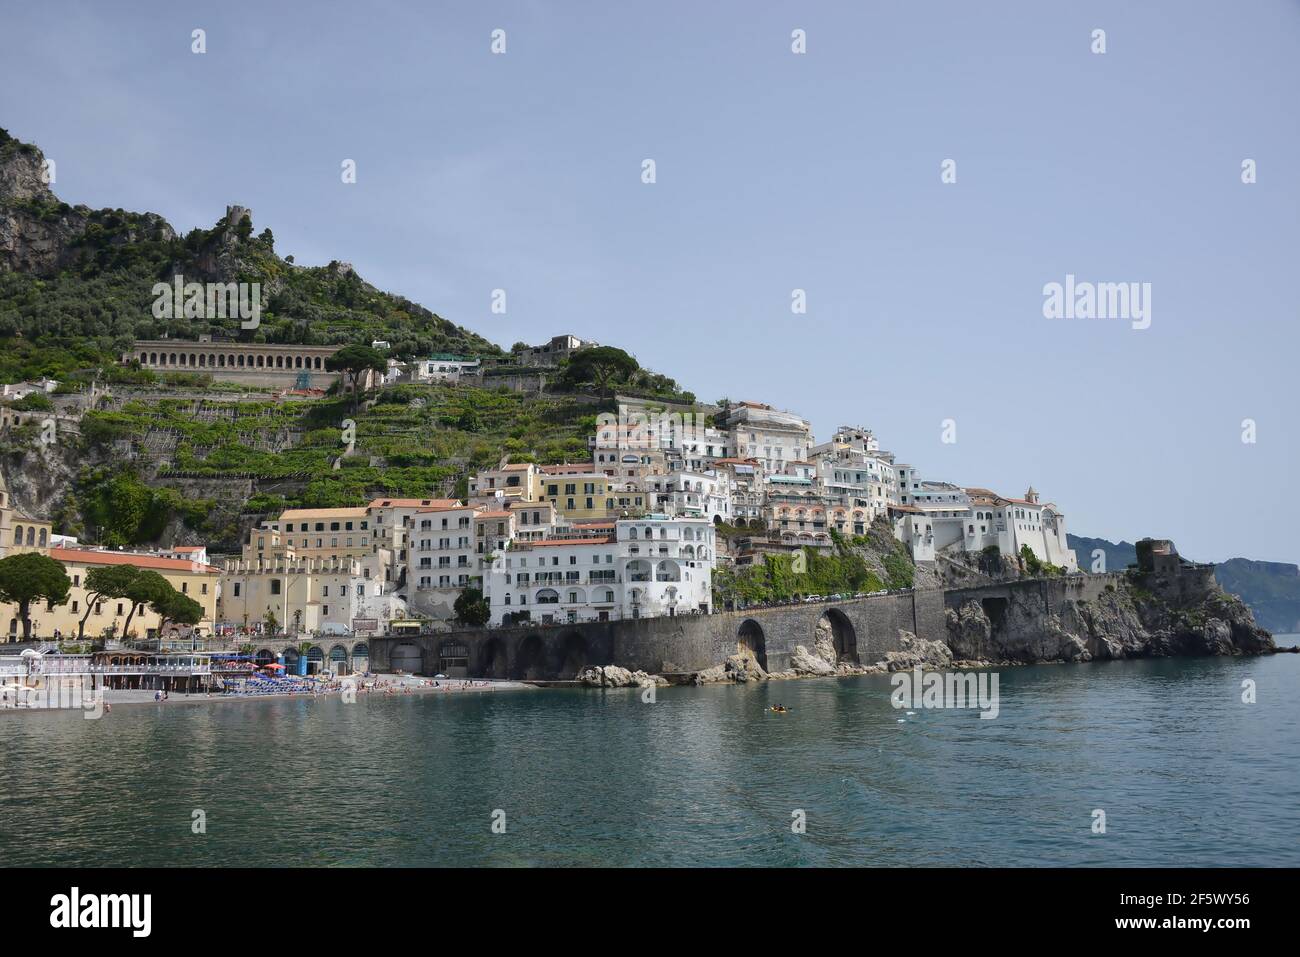 Amalfi is a city in a suggestive natural environment,Between the ninth and eleventh centuries, it was the seat of a powerful maritime republic. Cathed Stock Photo